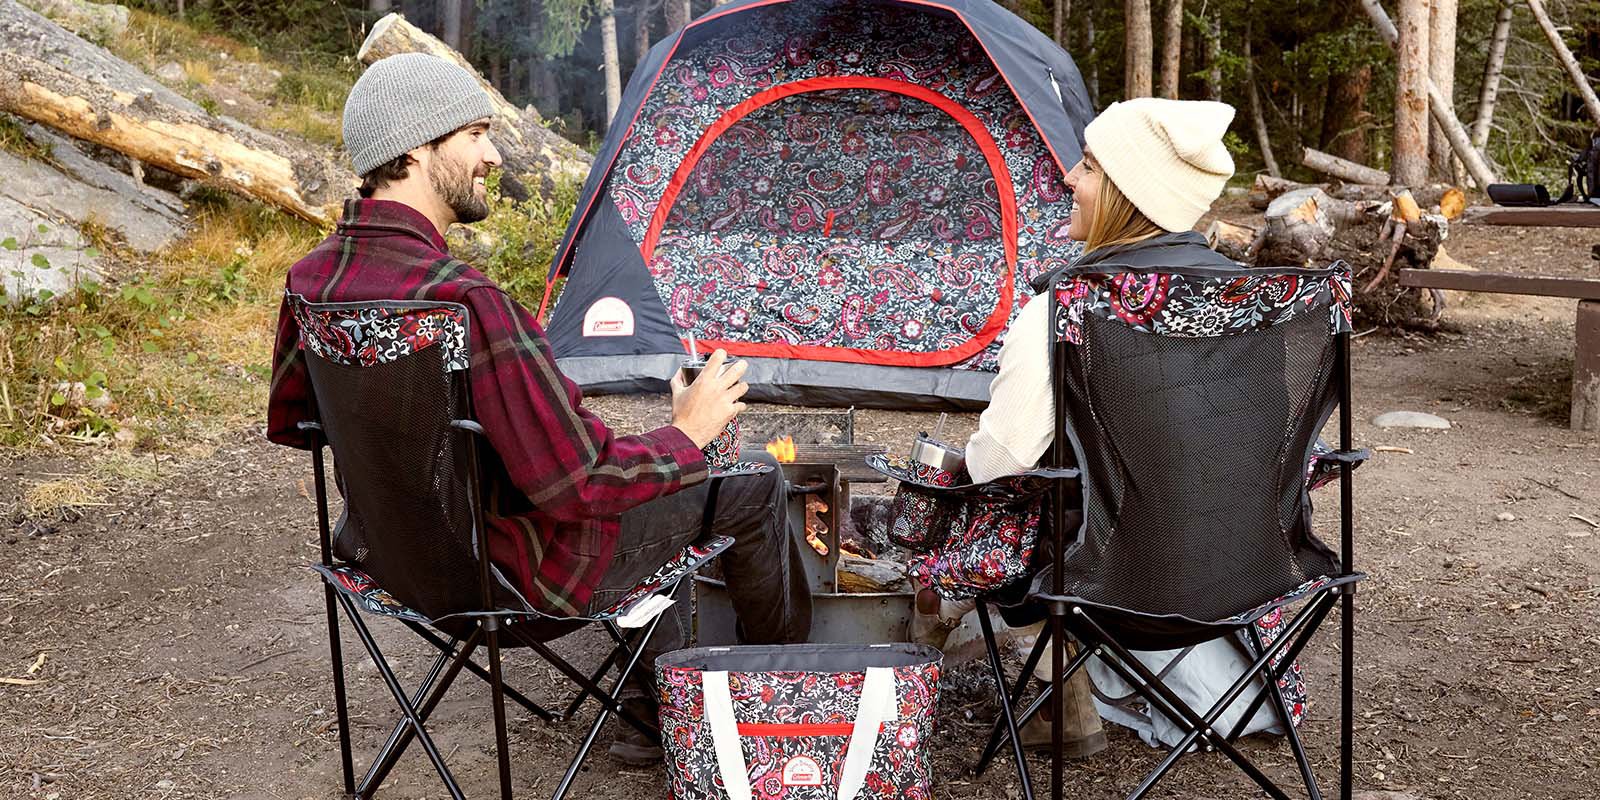 Two people outside with Vera Bradley camping gear